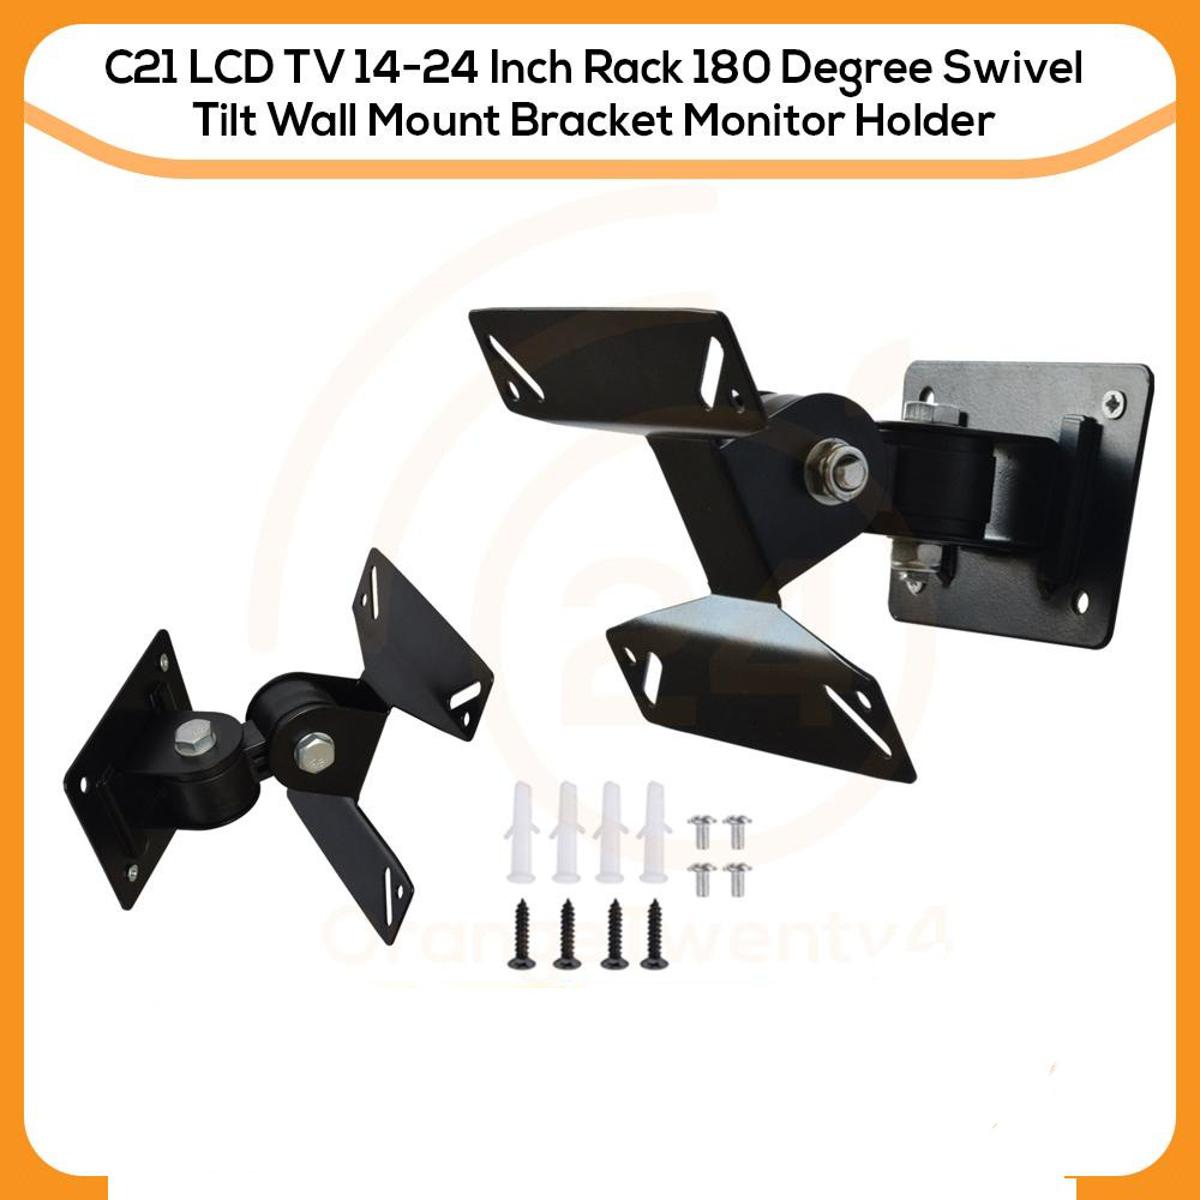 K2 F01 Wall Mount and Stand Holder Price in BD